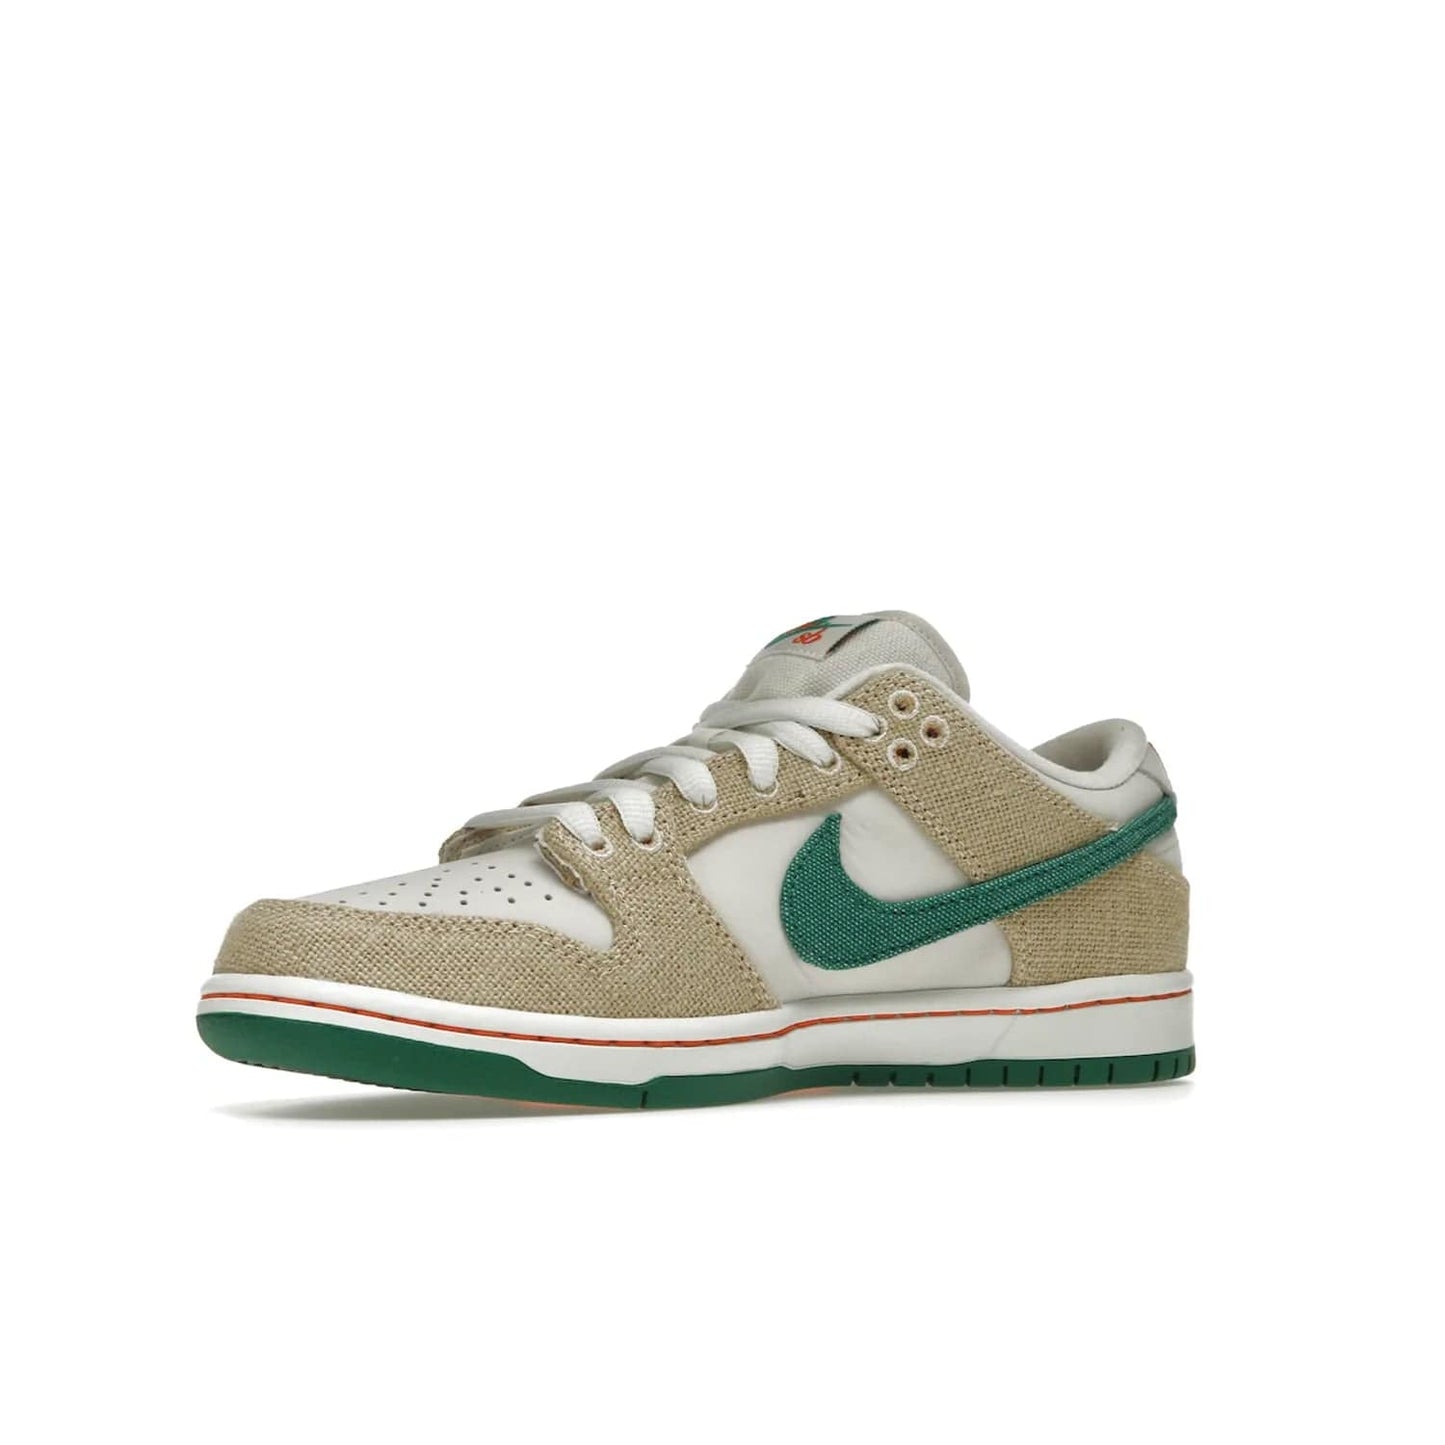 Nike SB Dunk Low Jarritos - Image 16 - Only at www.BallersClubKickz.com - Shop limited edition Nike SB Dunk Low Jarritos! Crafted with white leather and tear-away canvas materials with green accents. Includes orange, green, and white laces to customize your look. Available now.